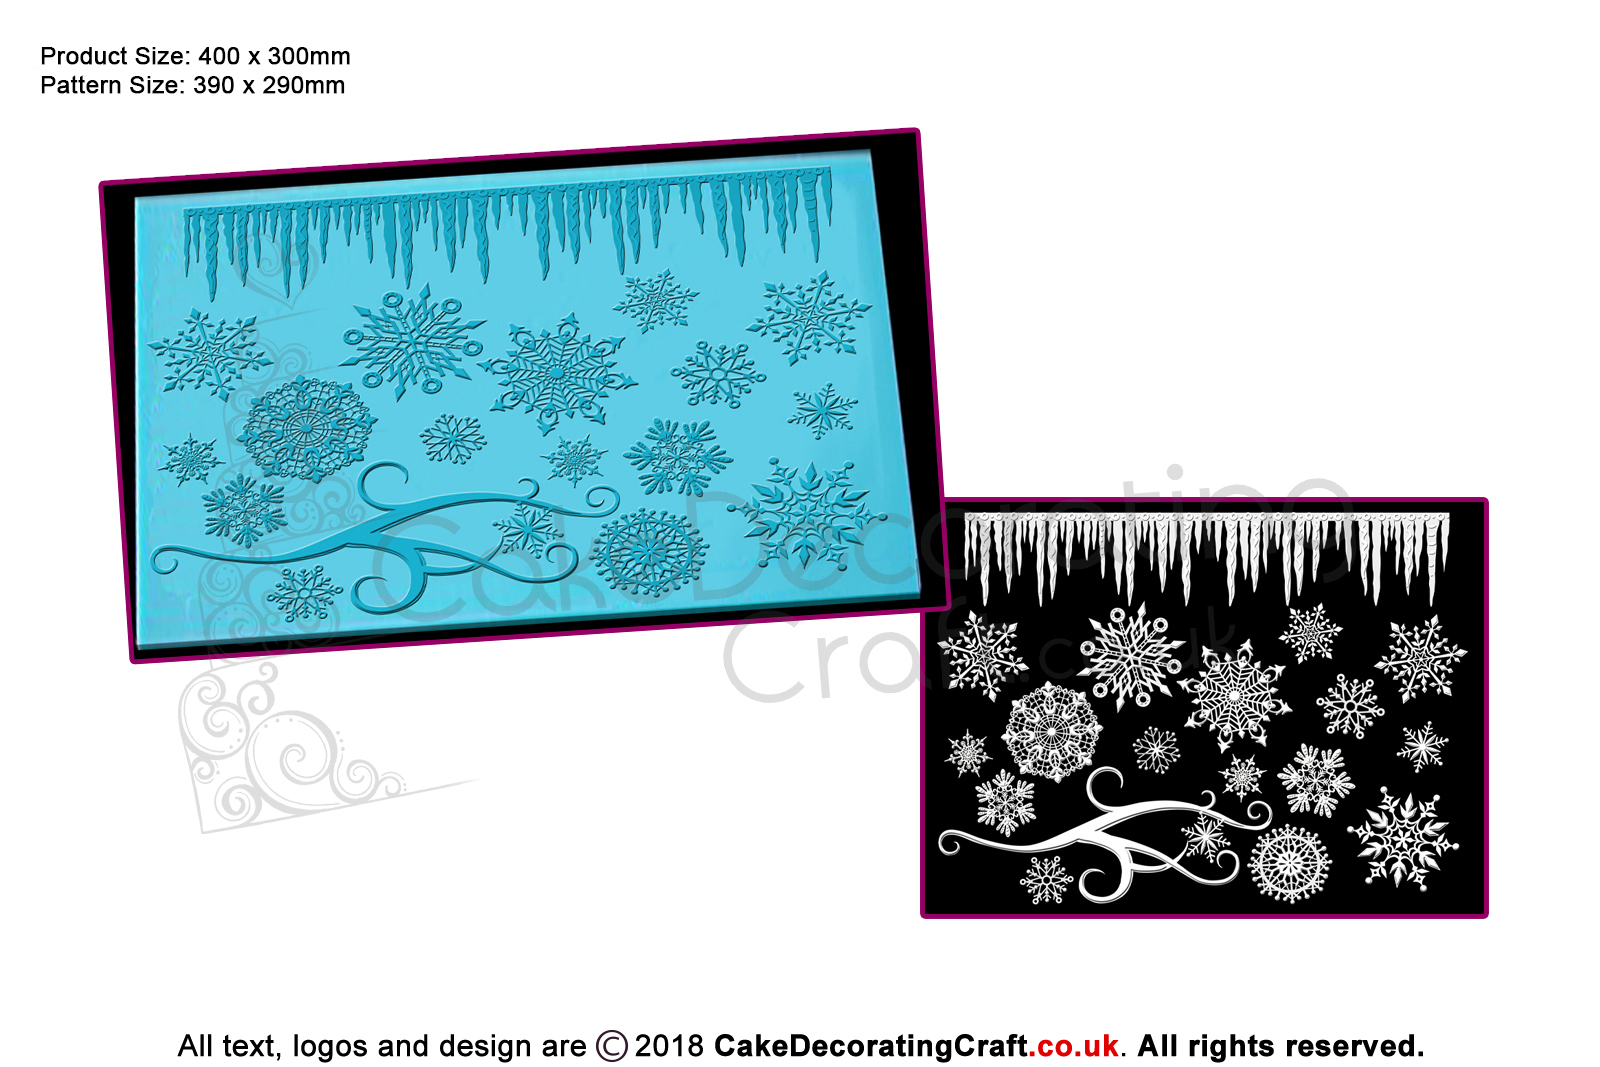 3D Frozen Crystals | Cake Lace Mats for Edible Cake Lace Mixes and Premixes | Cake Decorating Craft Tool | Christmas Cake Cupcake Craft Gift Ideas